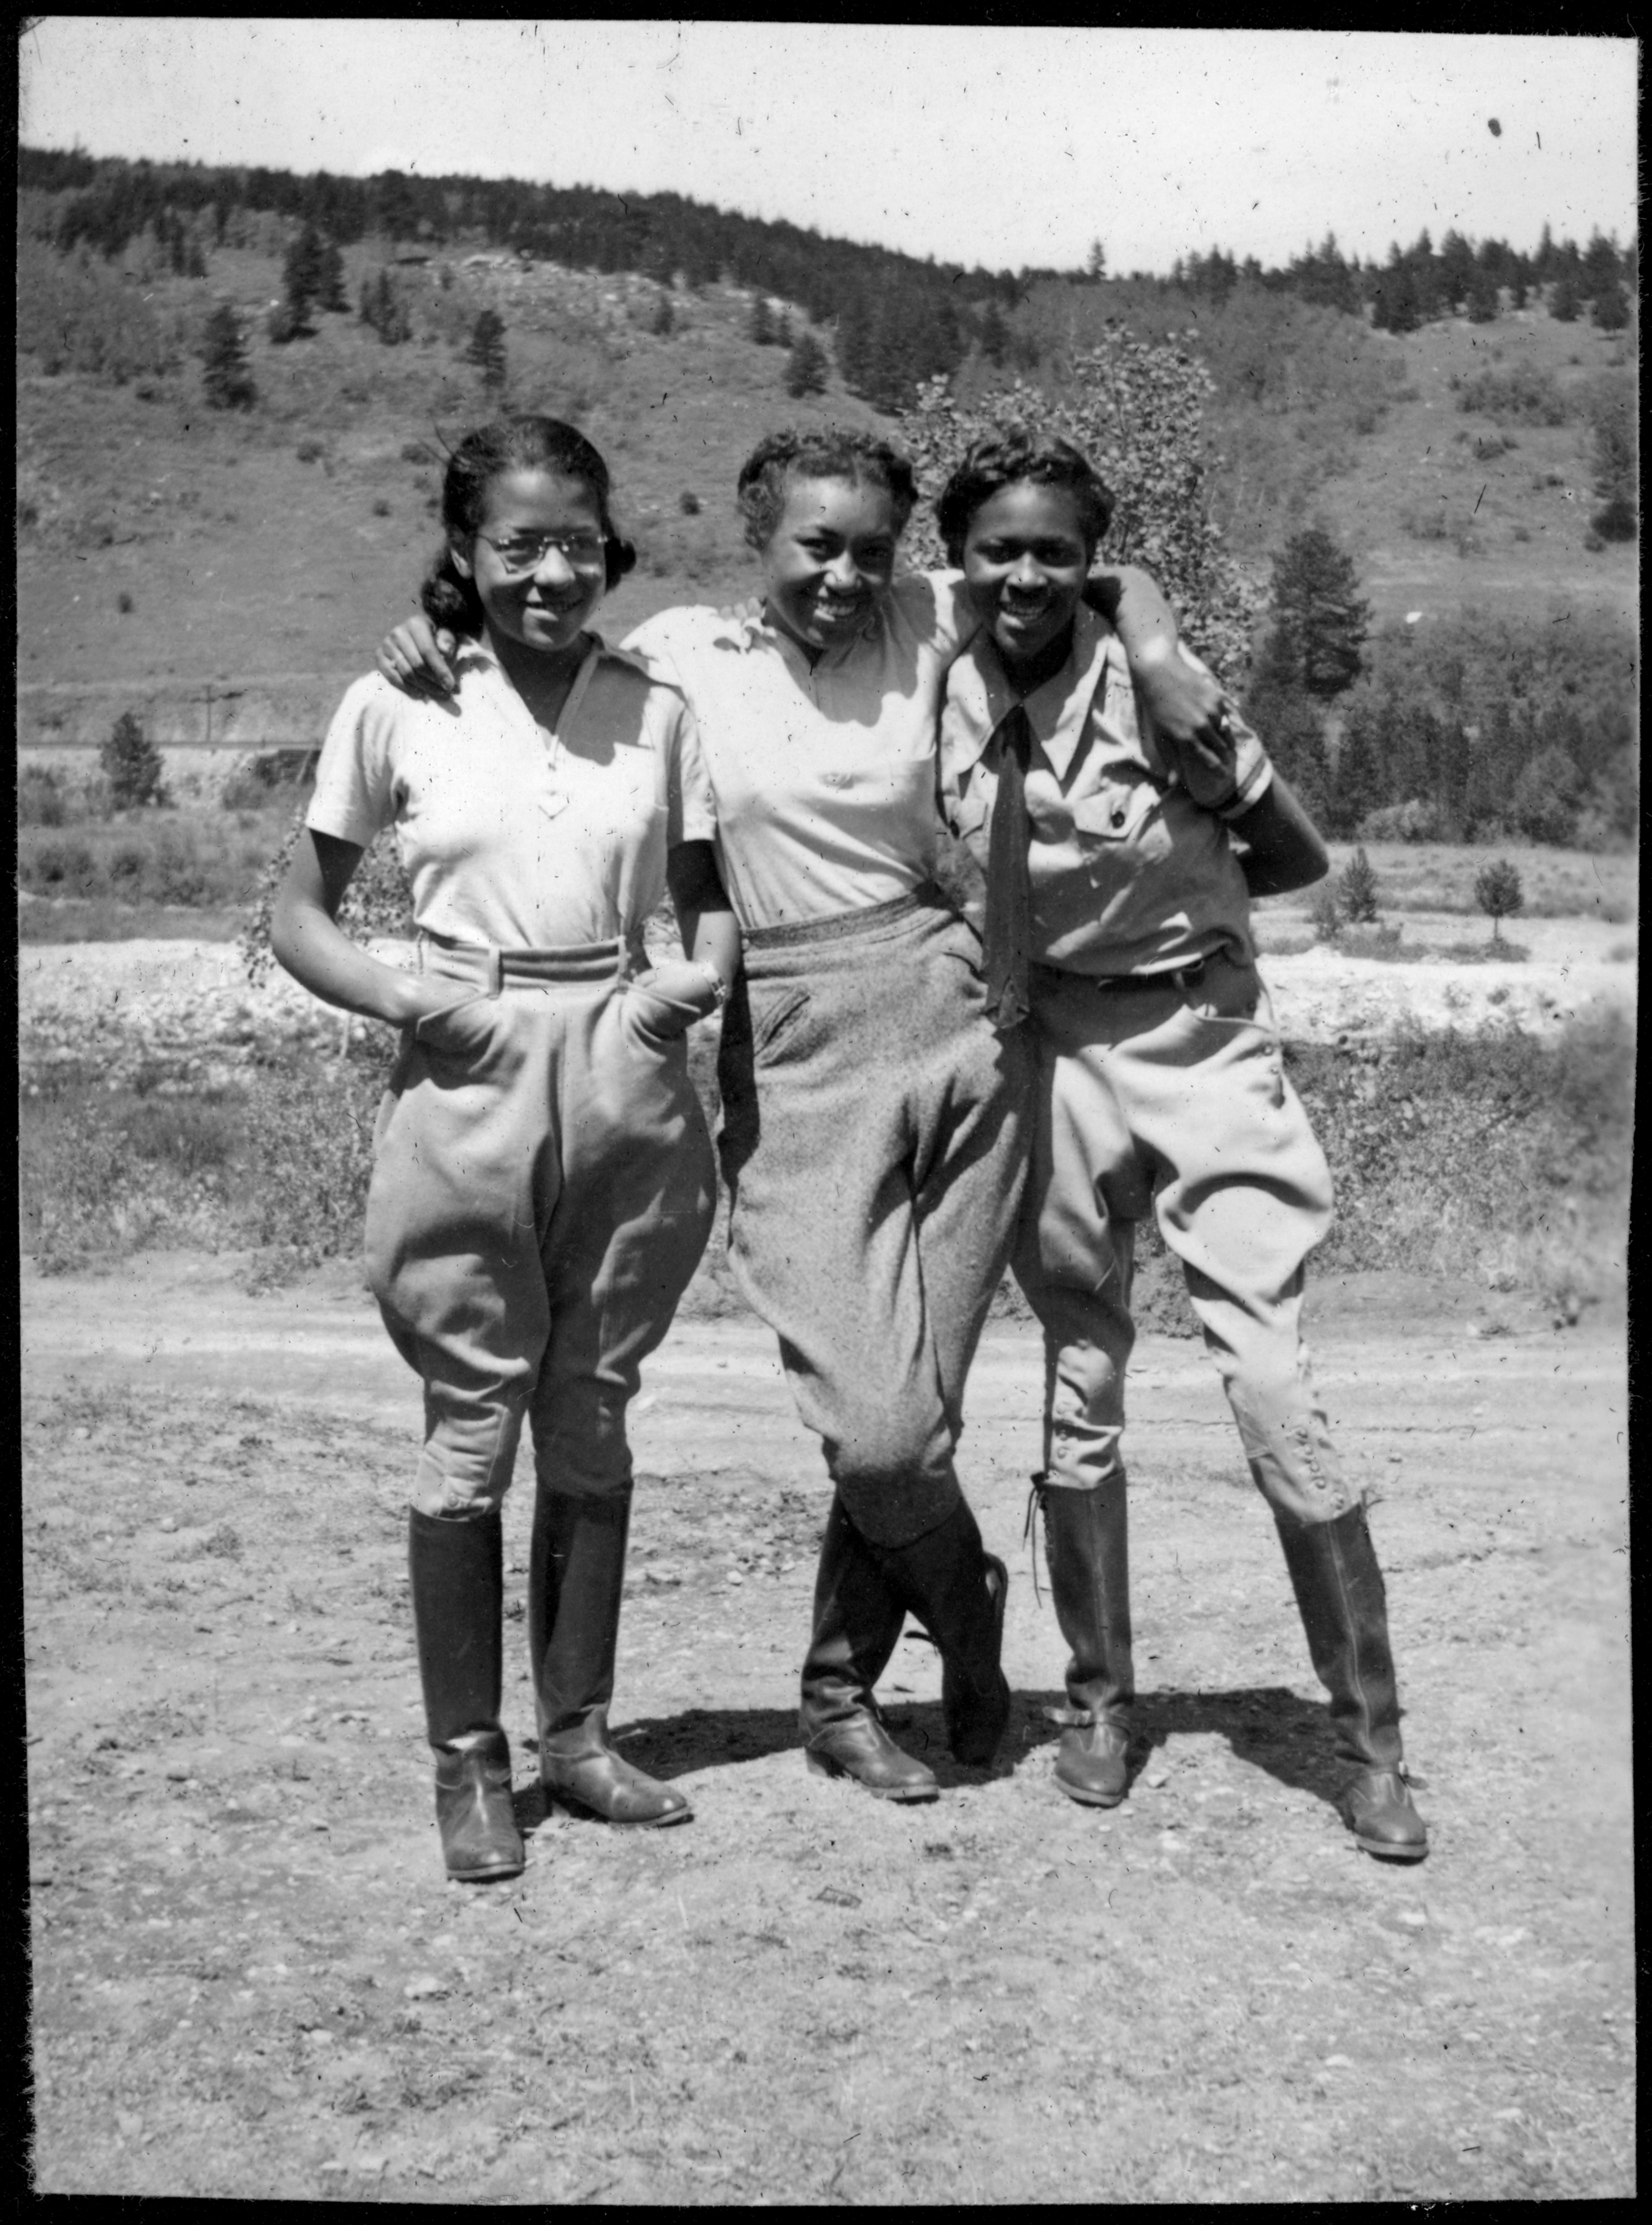 In 1937, three young women pose at Camp Nizhoni, a summer camp held at Lincoln Hills